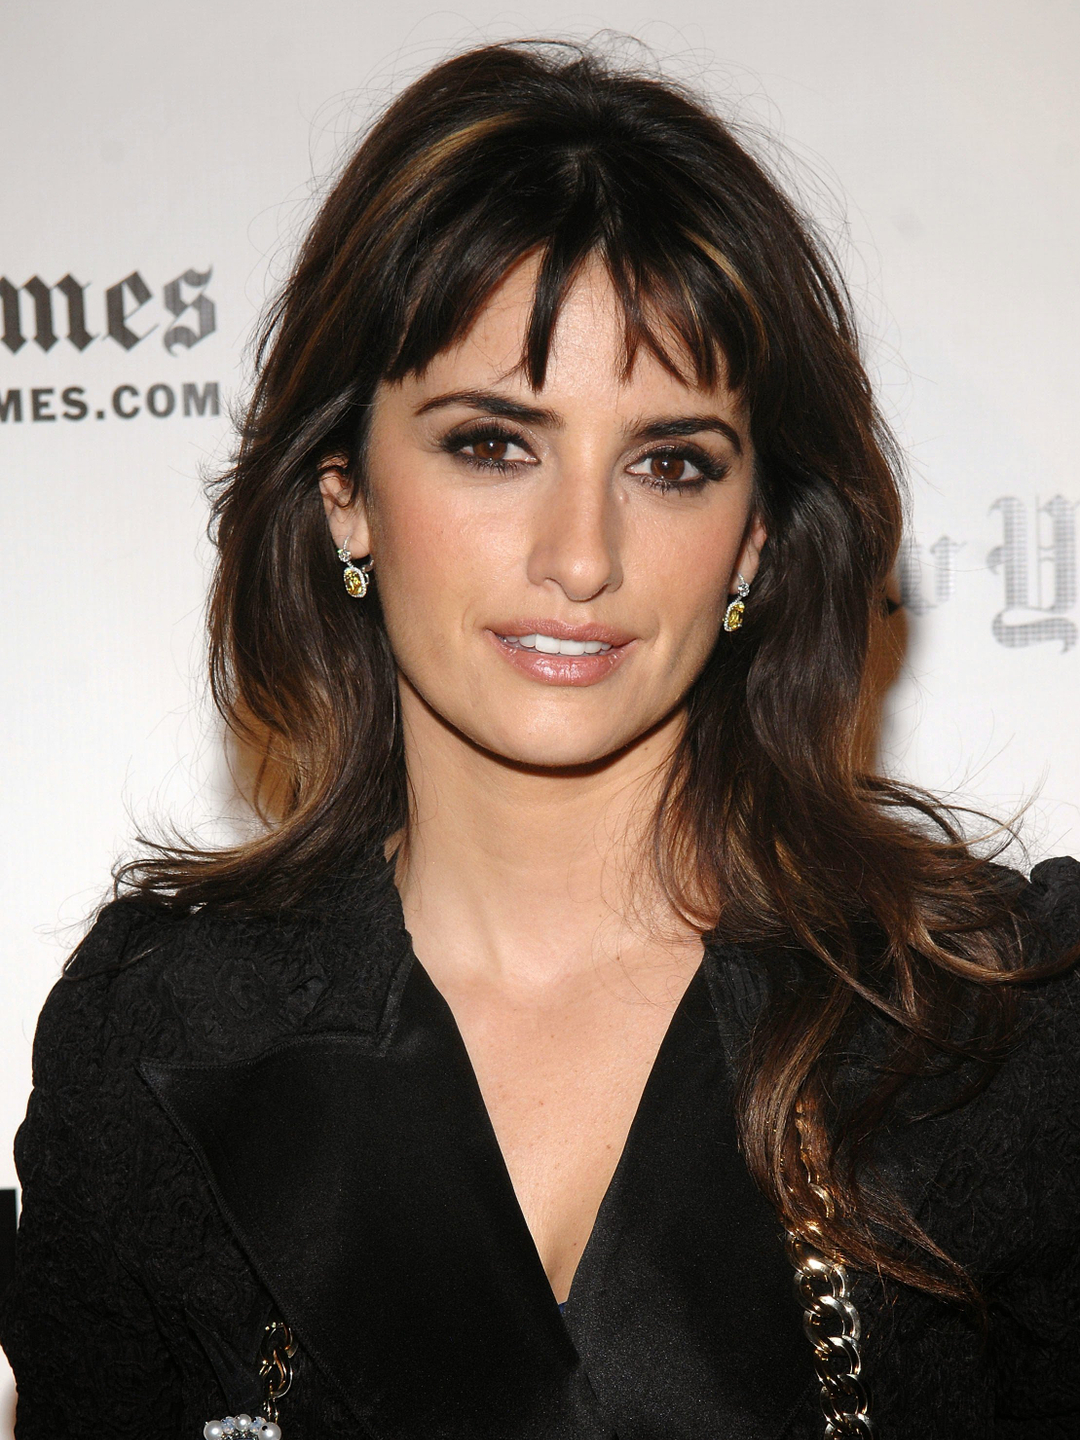 Penelope Cruz who are her parents